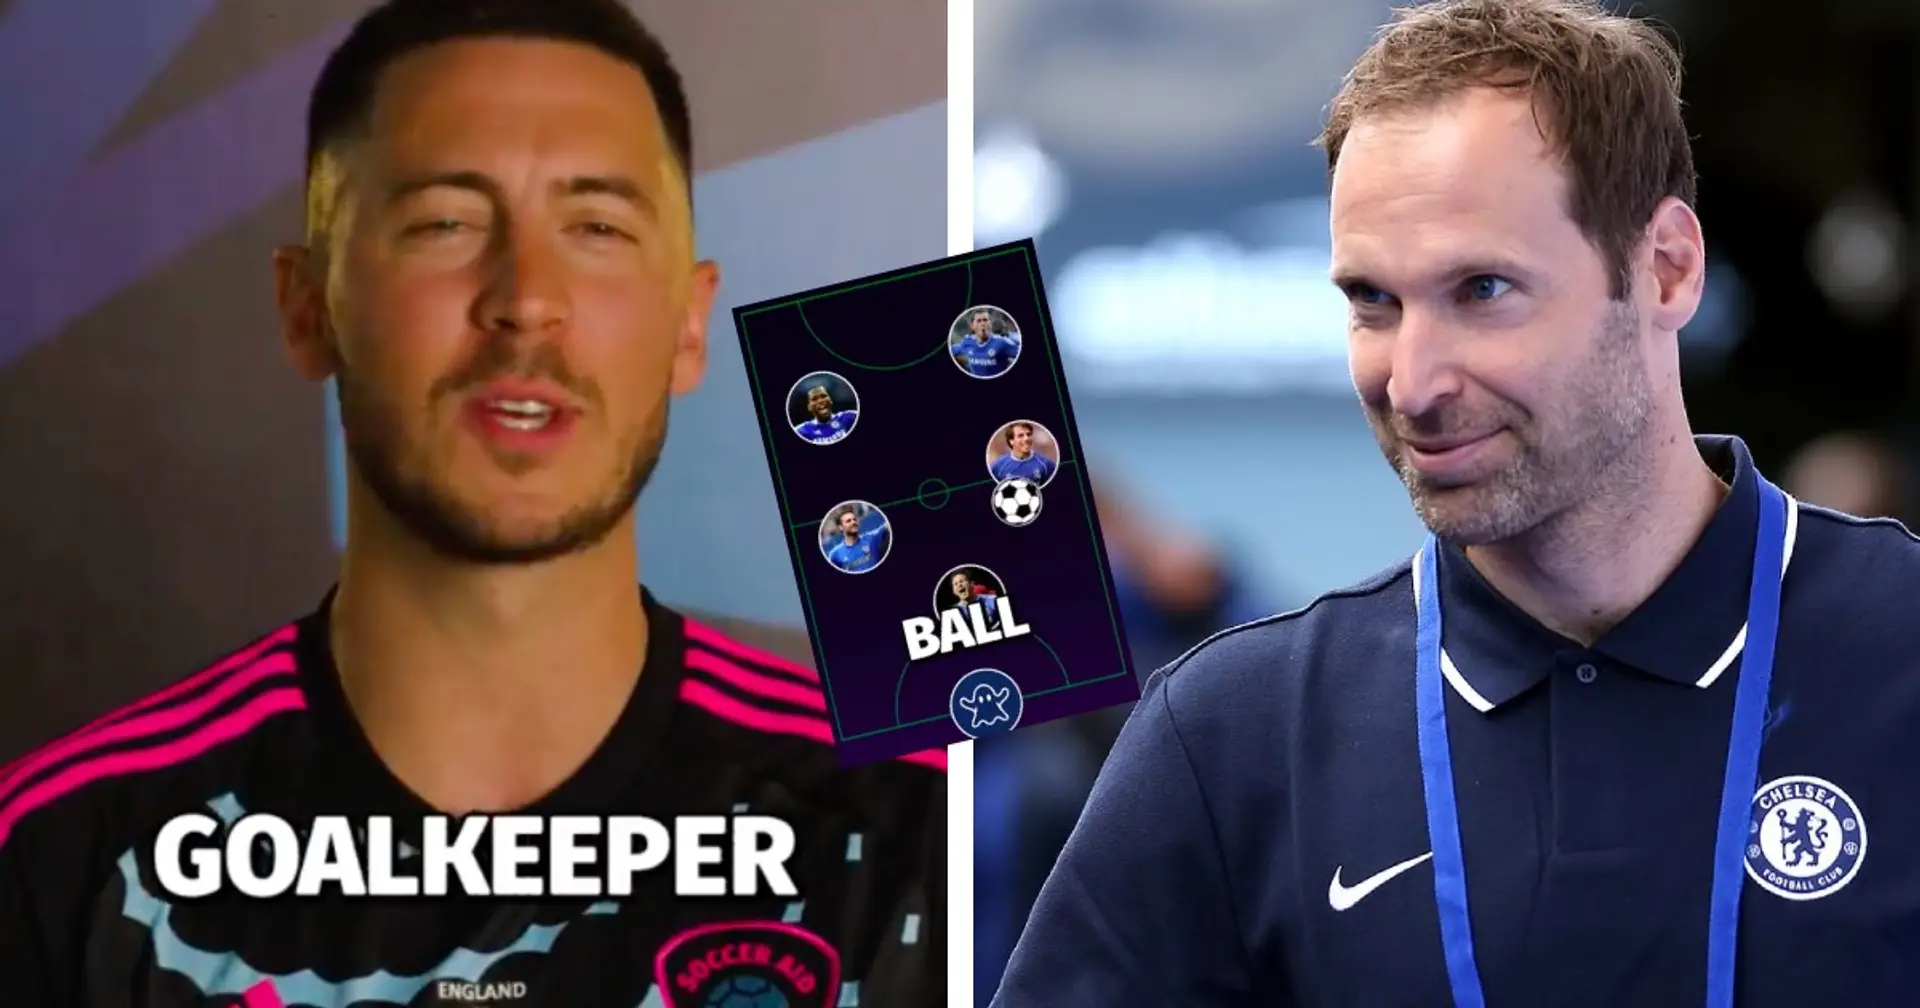 Eden Hazard picks ultimate Chelsea 5-a-side team - no place for Cech or Terry